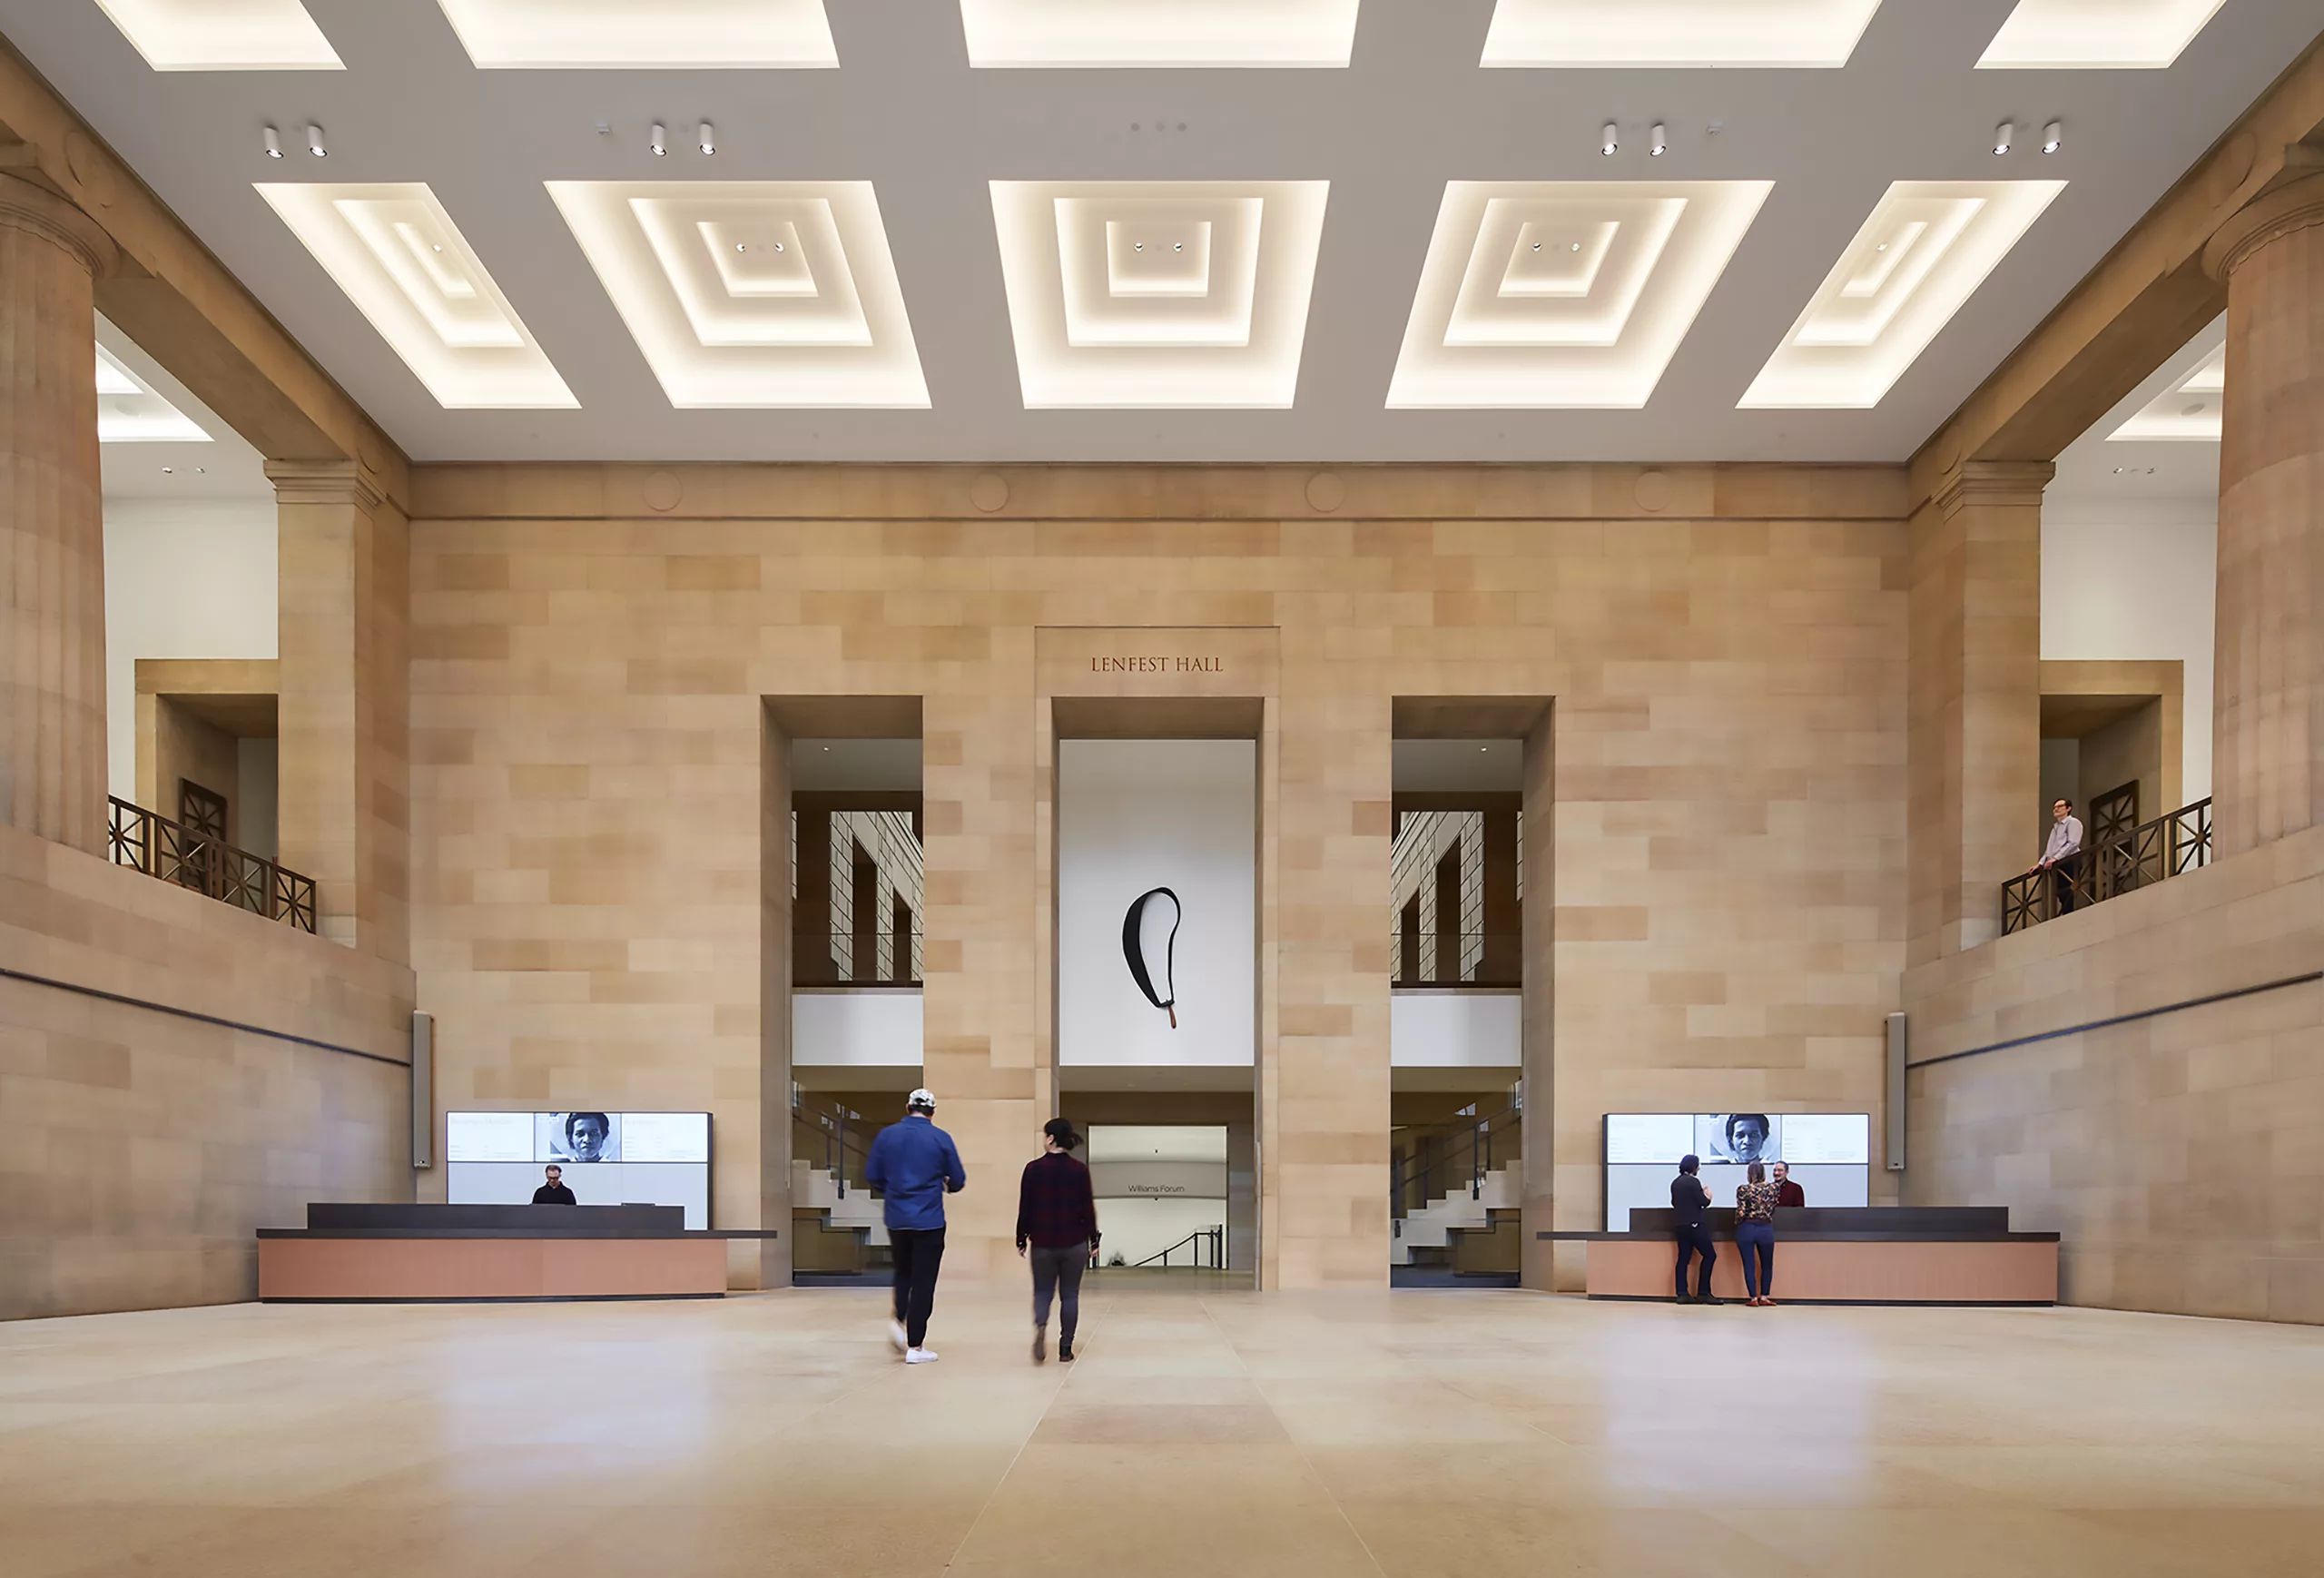 Philadelphia Museum of Art Expansion's Lenfest Hall interior with visitors and information desks